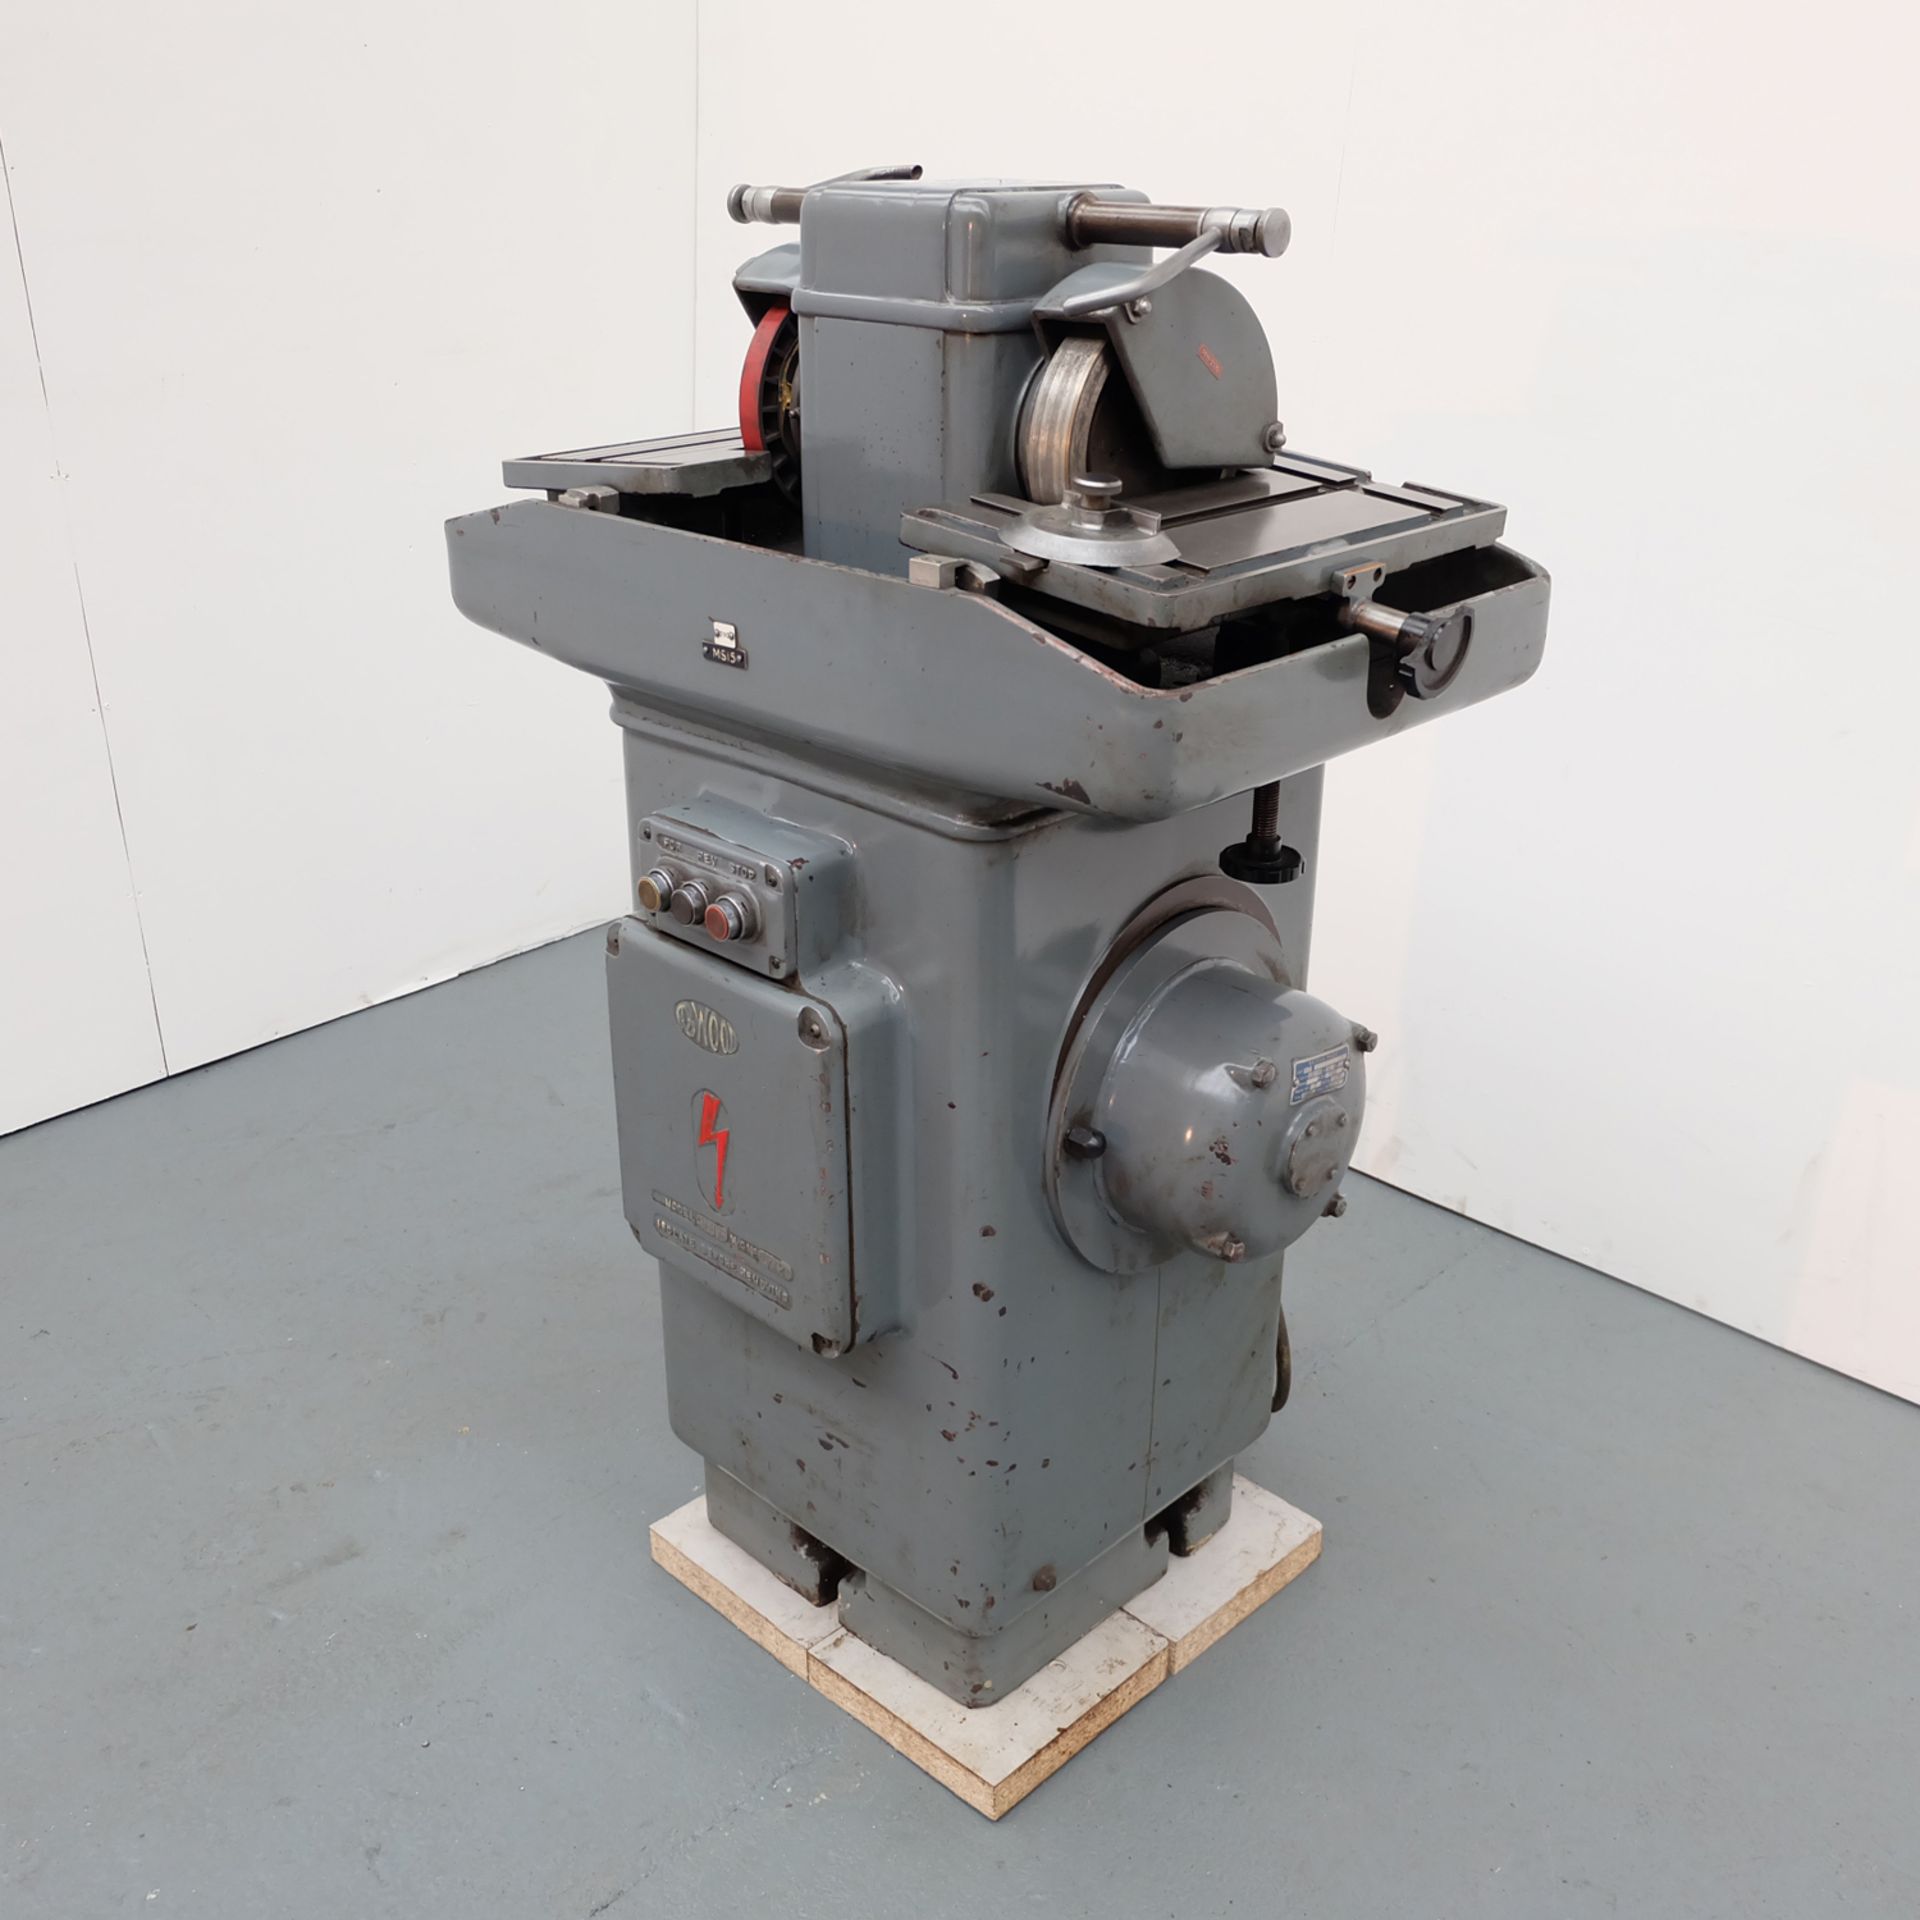 Abwood Twin Tilting Table Double Ended Lapping/Grinding Machine. 3 Phase. 1HP. - Image 2 of 10